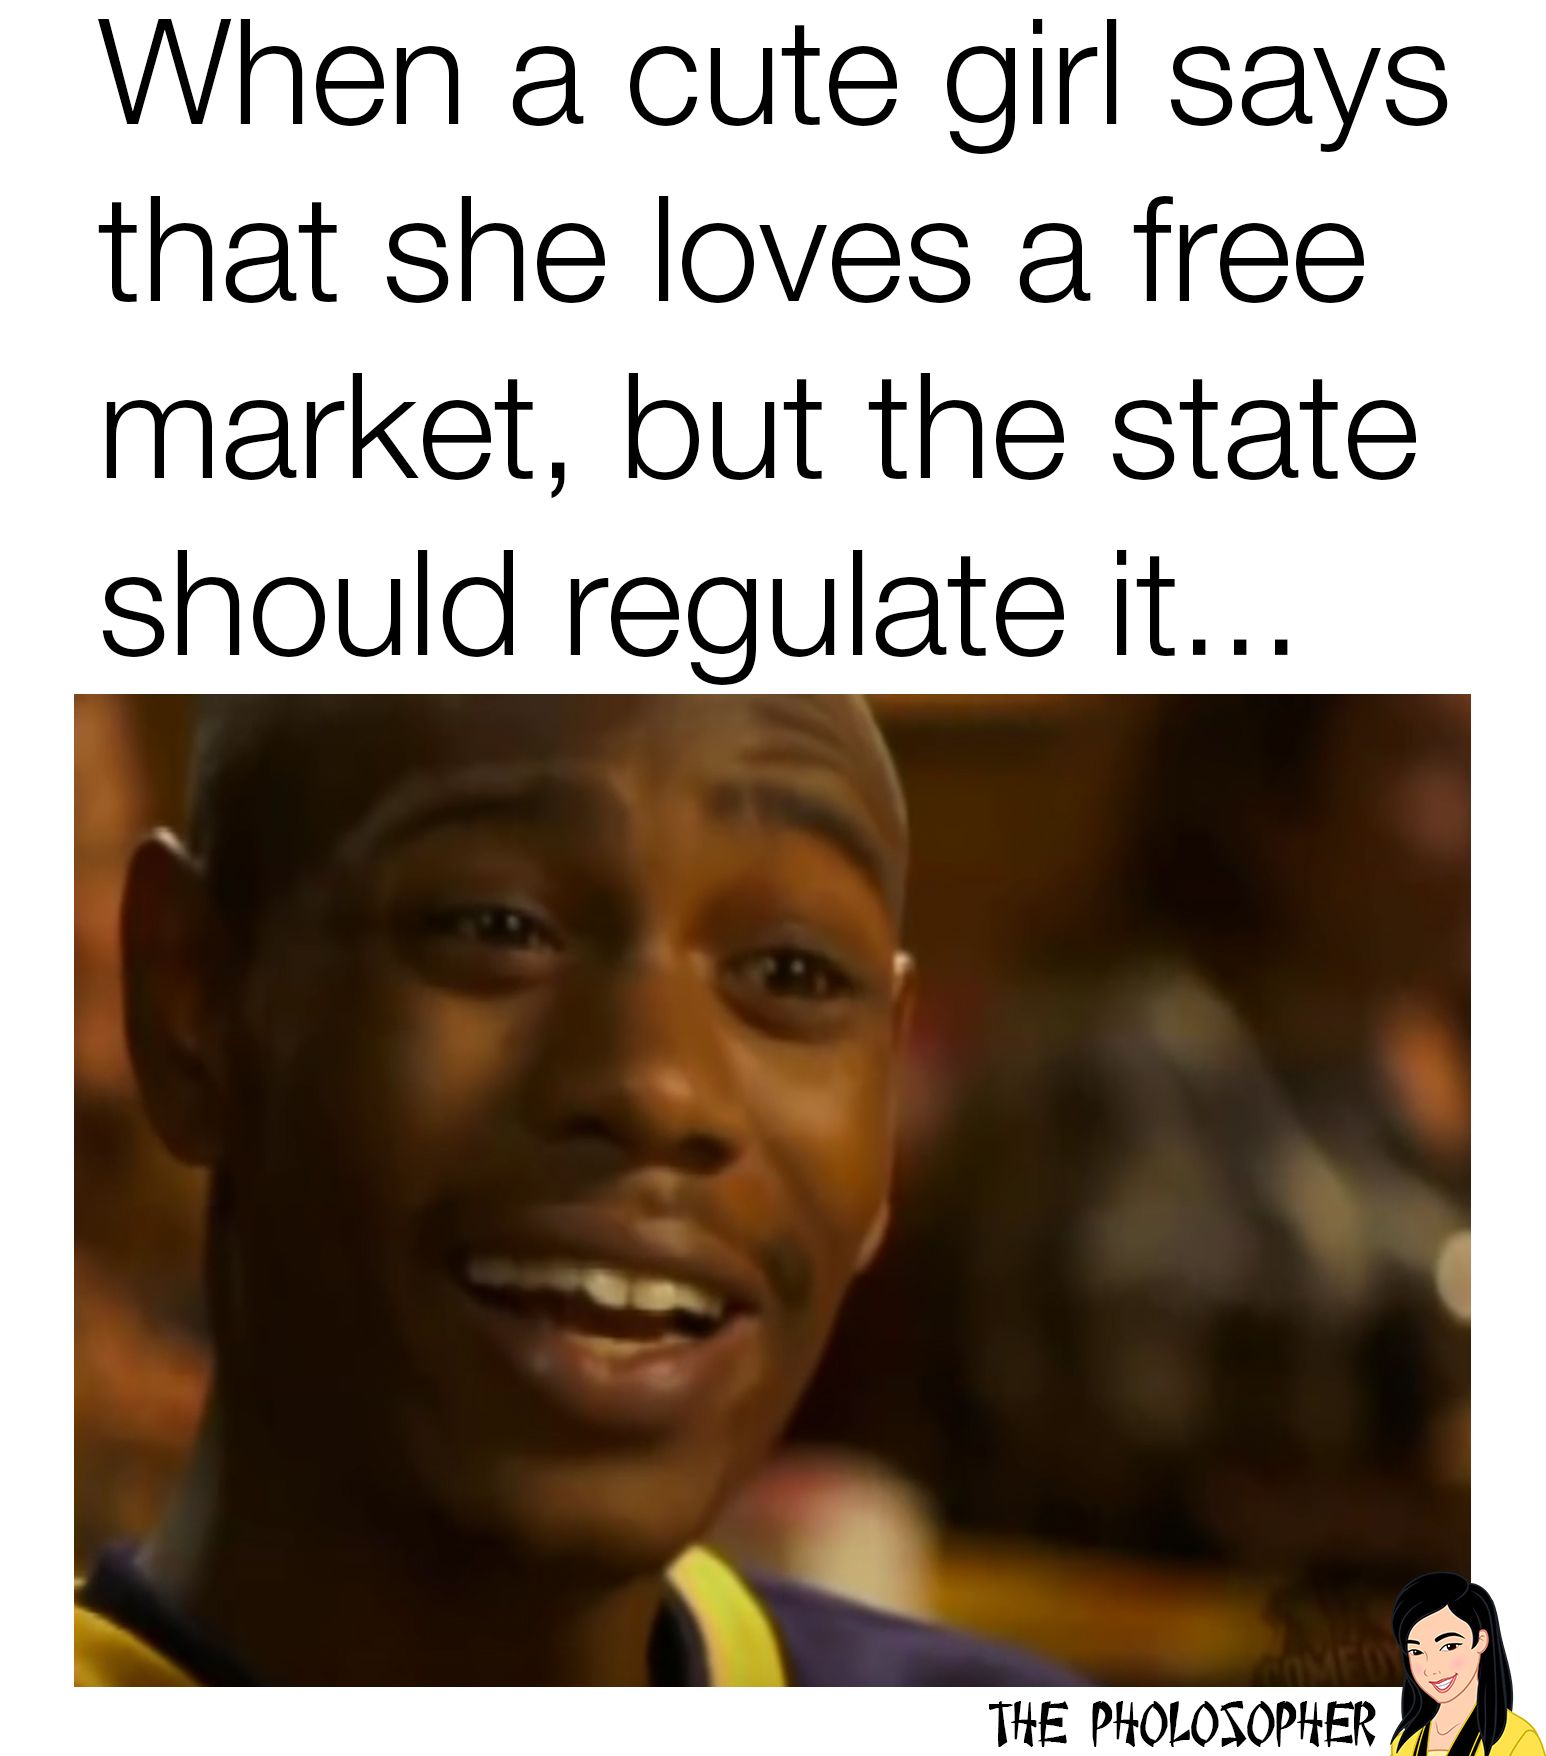 loves free markets but state chapelle.jpg